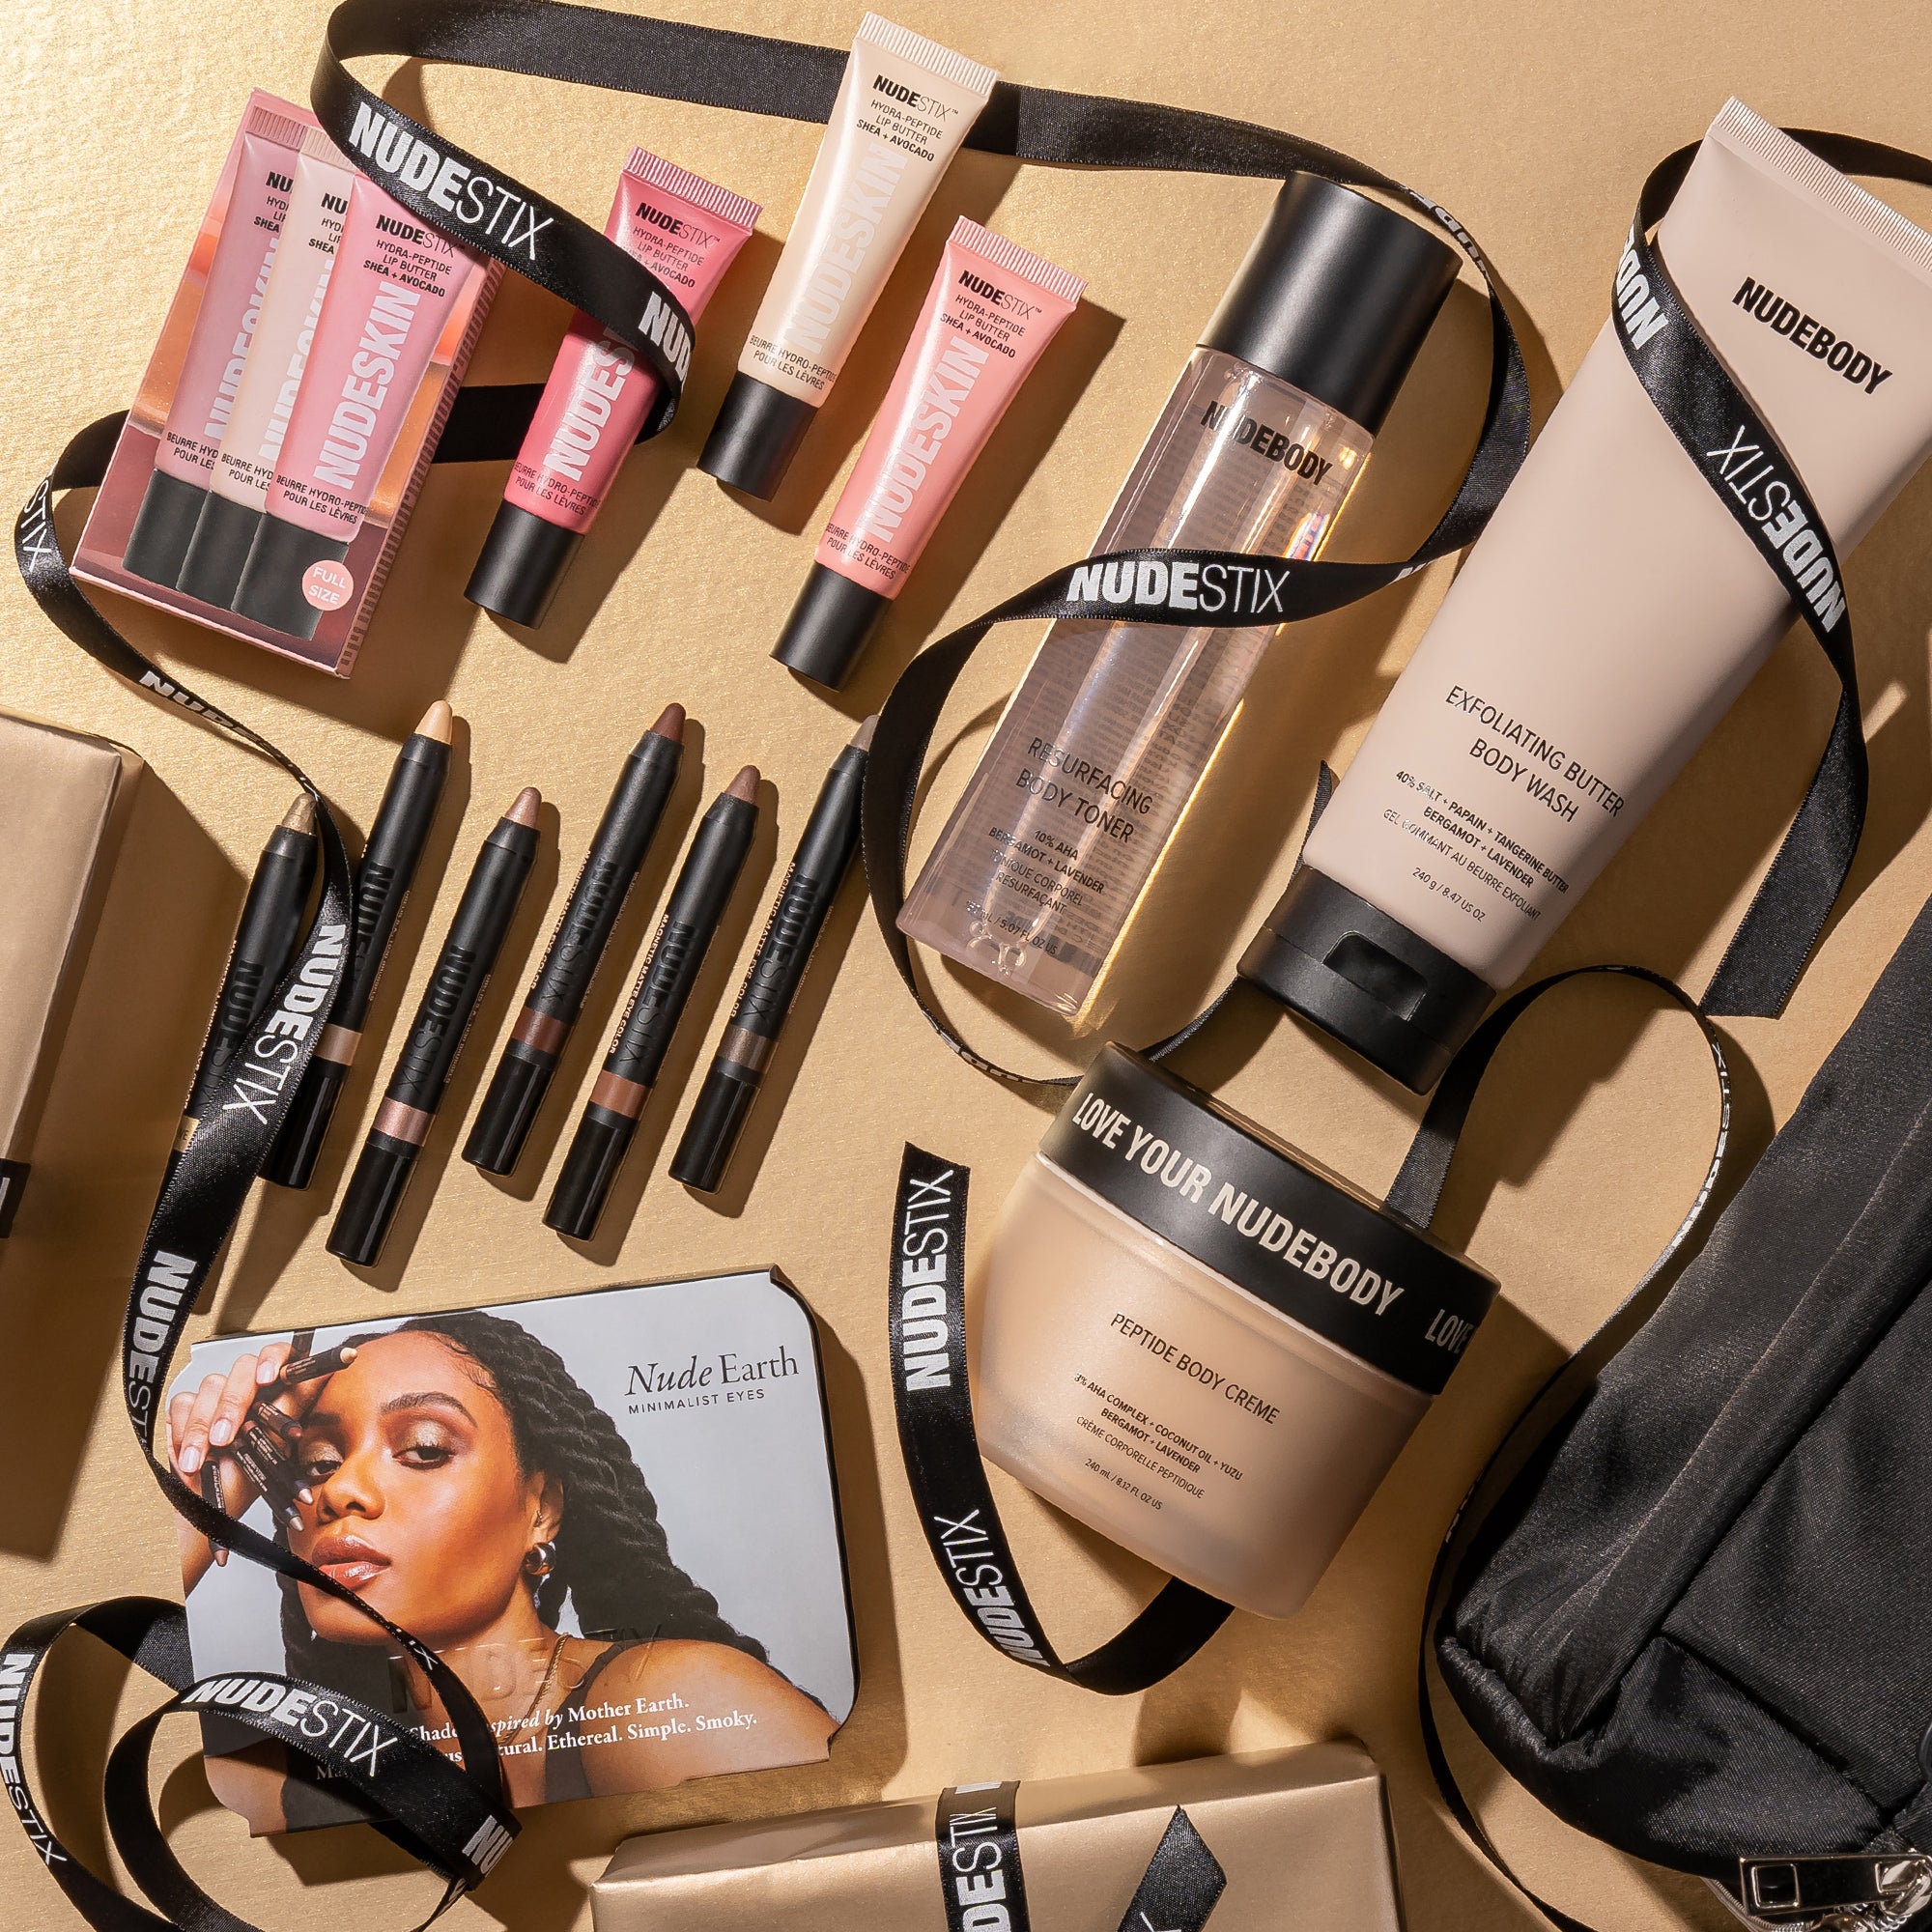 April beauty favourites: Clear Start Cooling Aqua Jelly, Nudeskin by  Nudestix & more